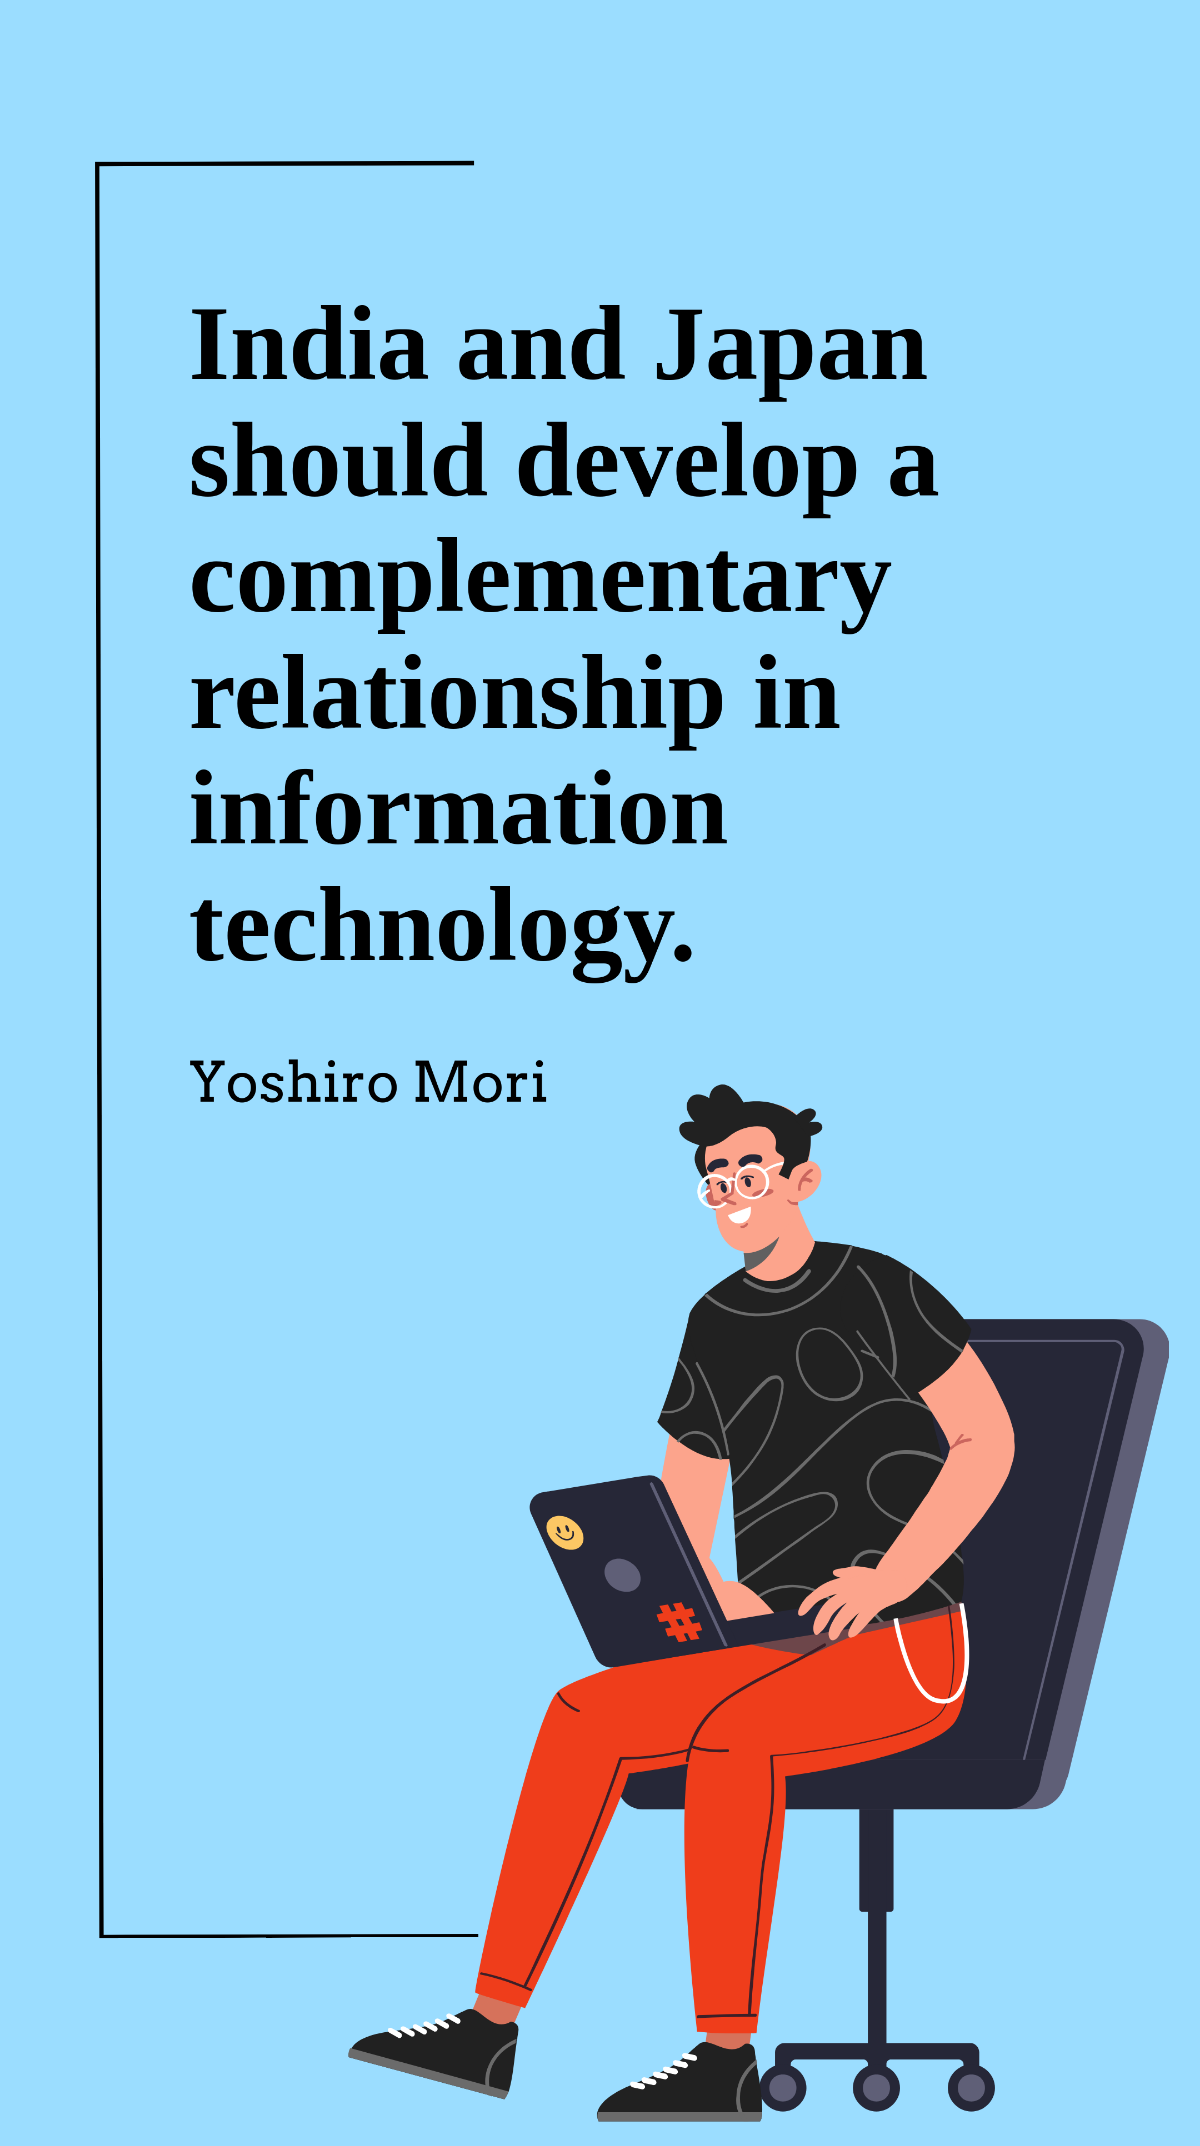 Yoshiro Mori - India and Japan should develop a complementary relationship in information technology. Template